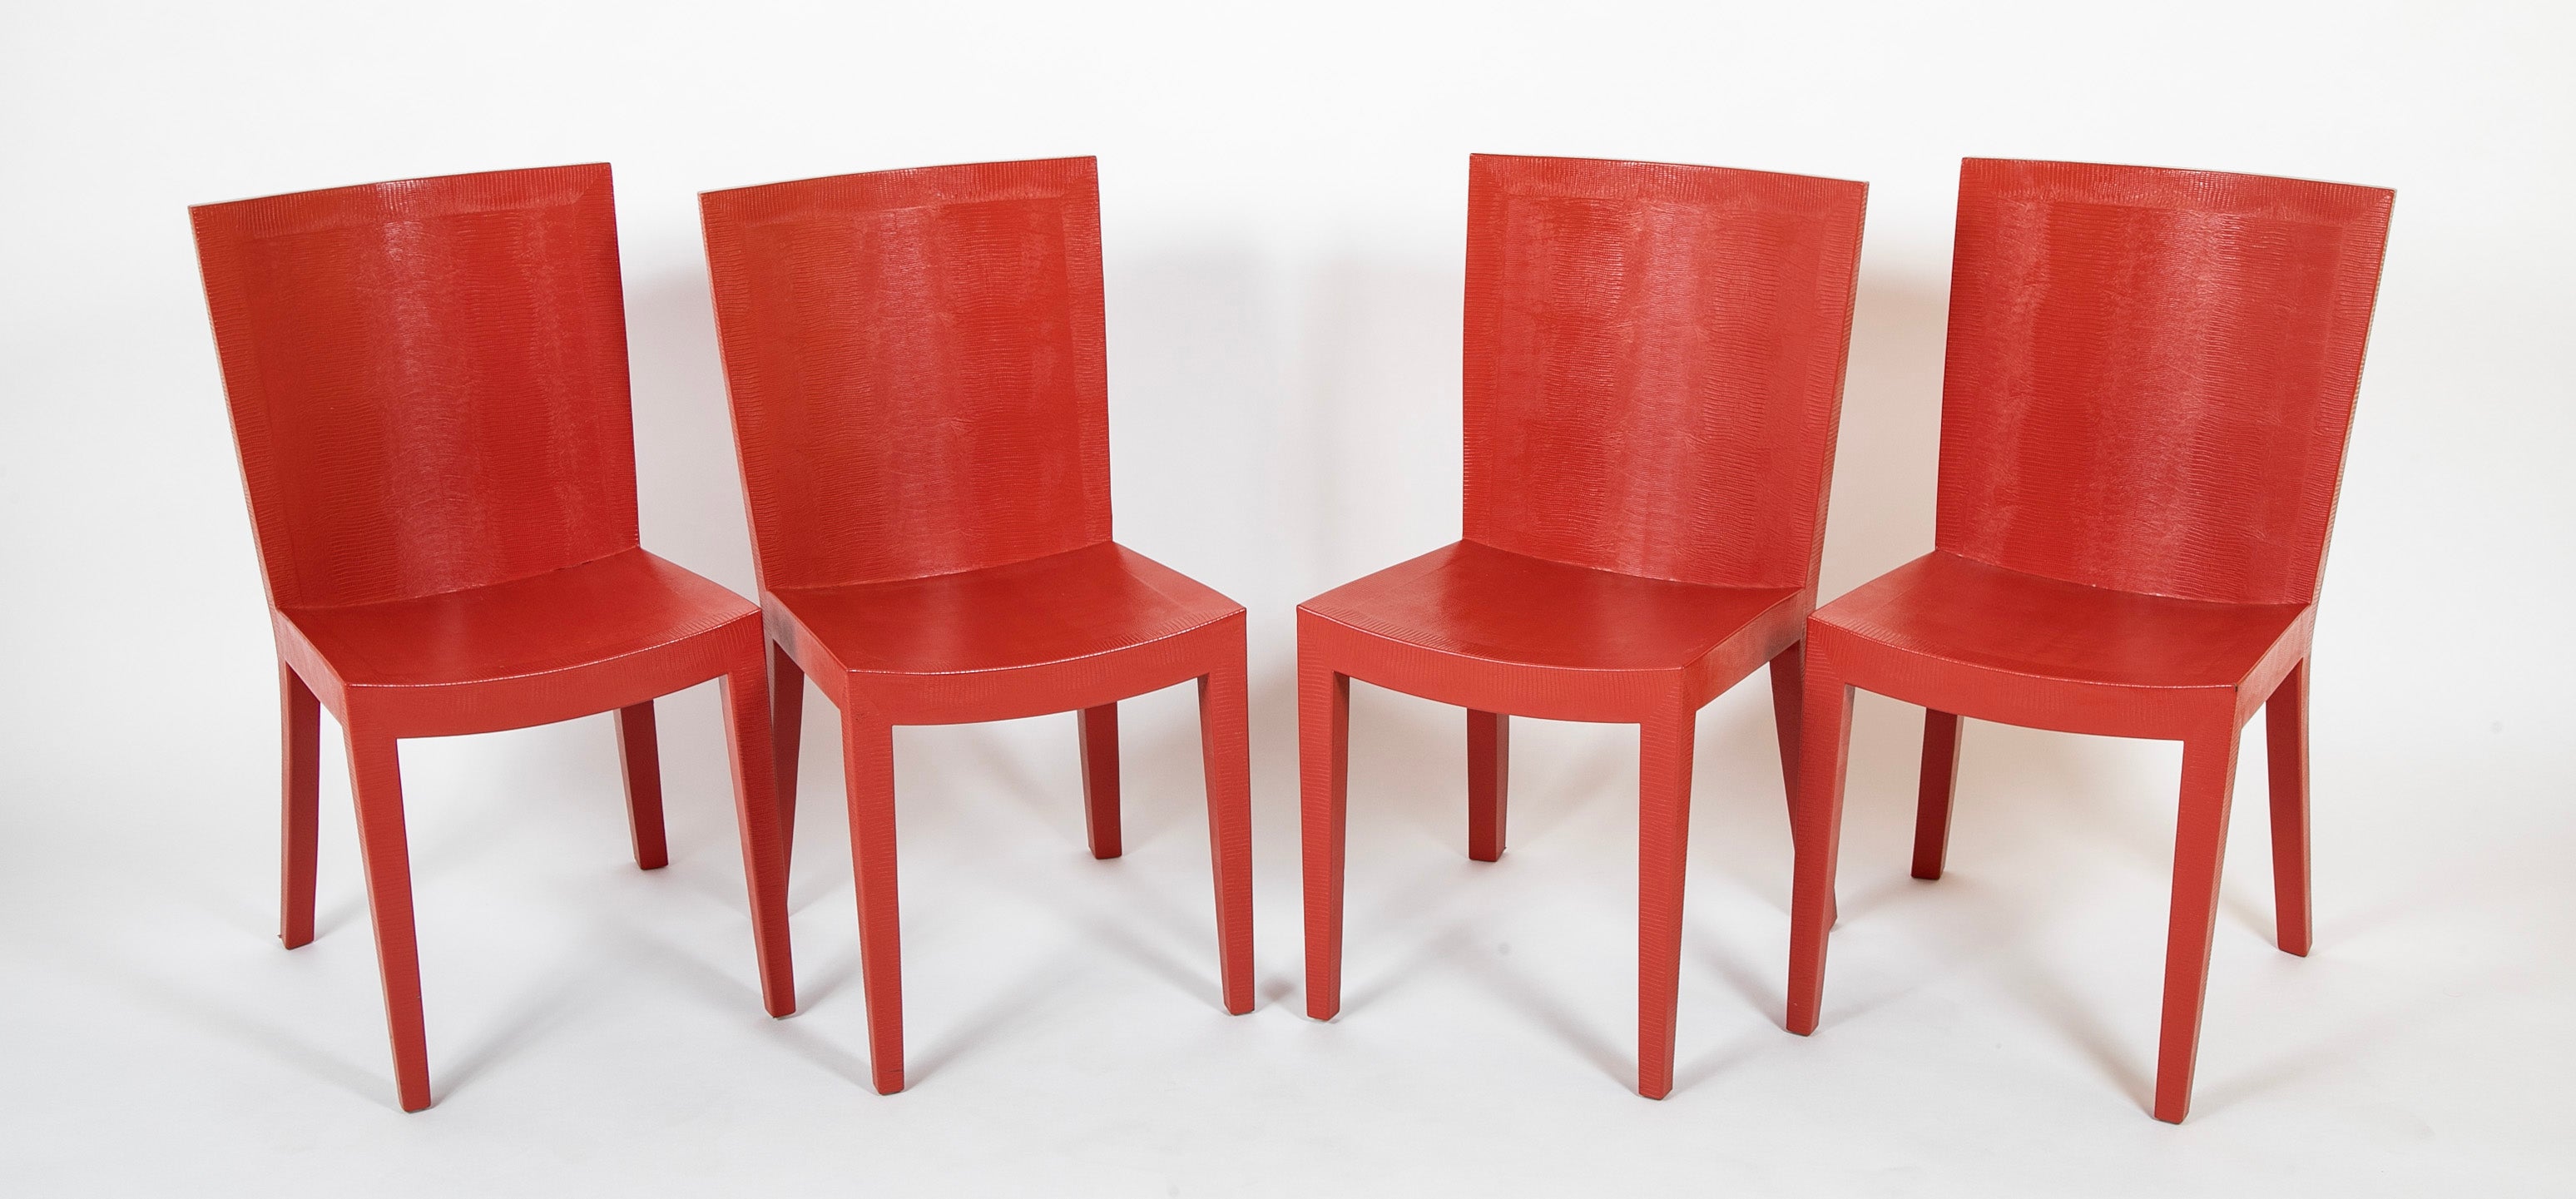 Set of Four Karl Springer "JMF" Chairs in Red Leather